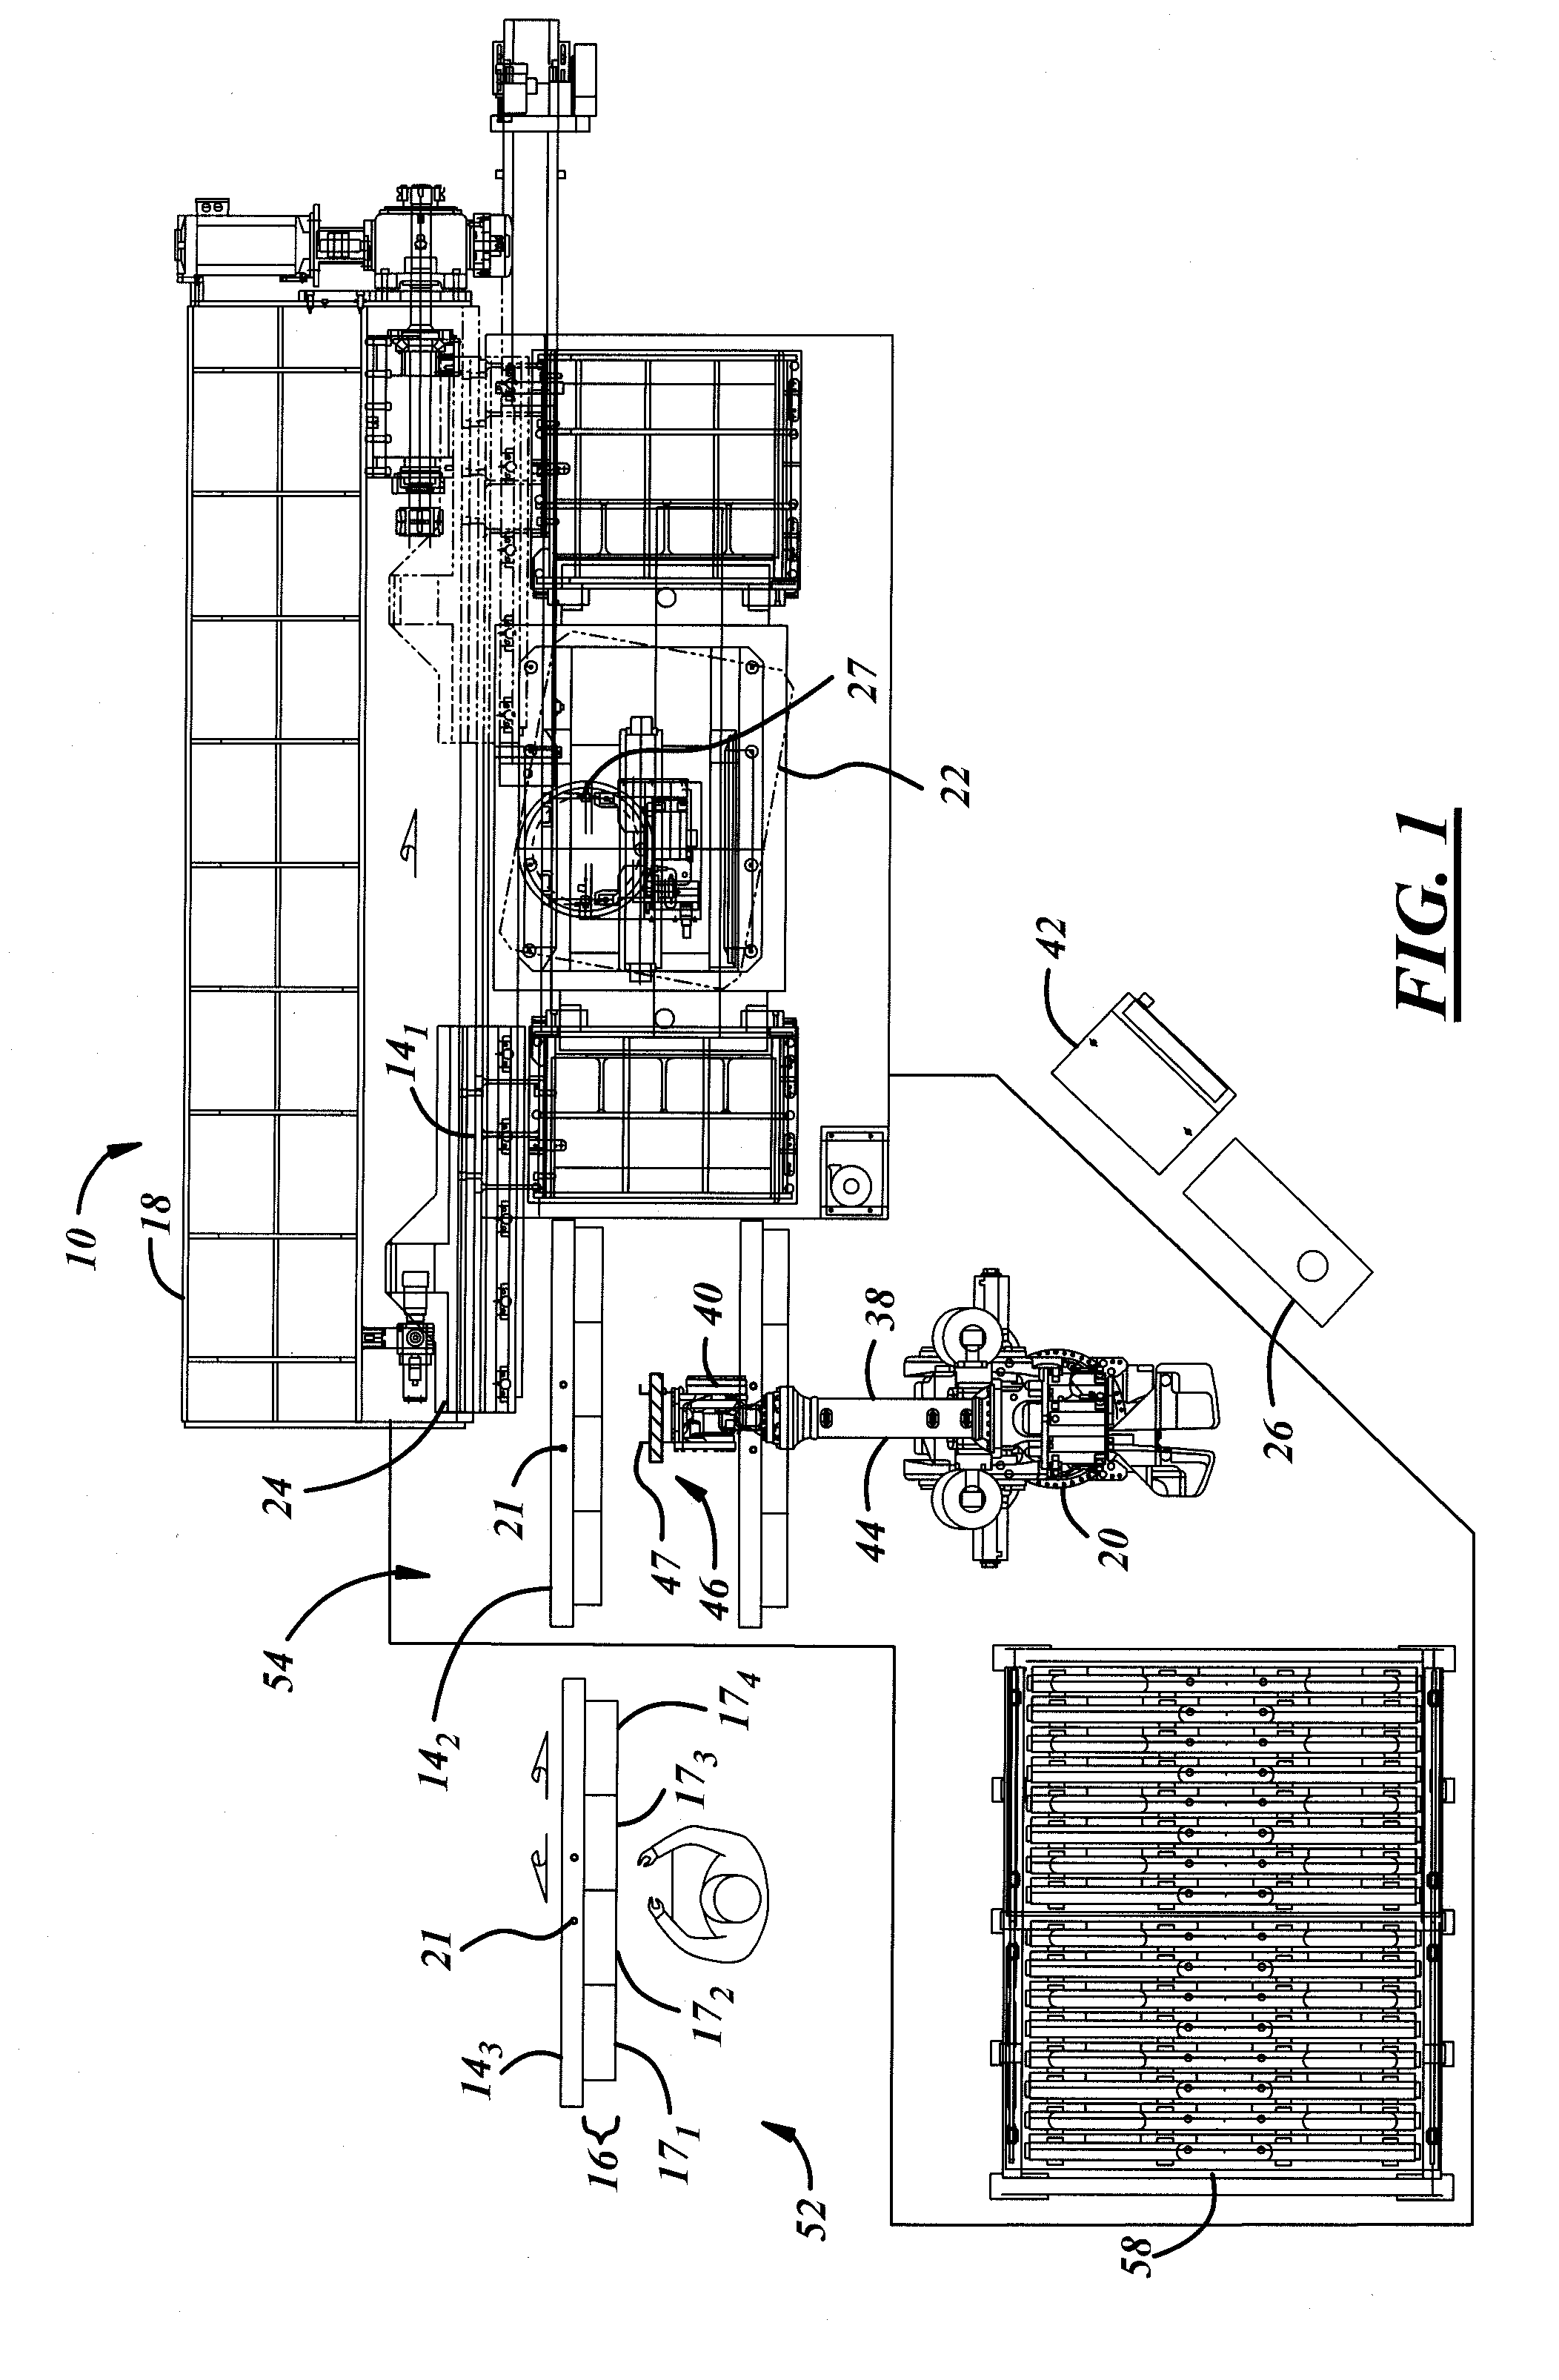 System and method for broaching a workpiece